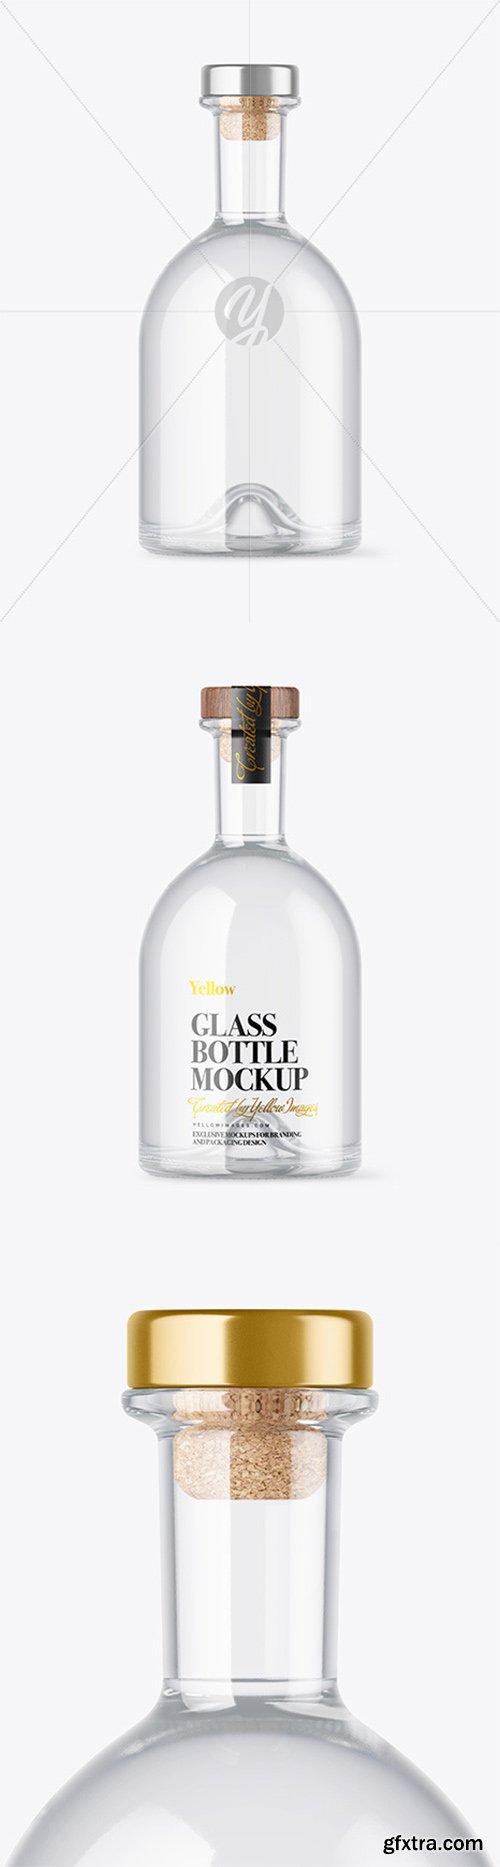 Clear Glass Vodka Bottle with Wooden Cap Mockup 79765